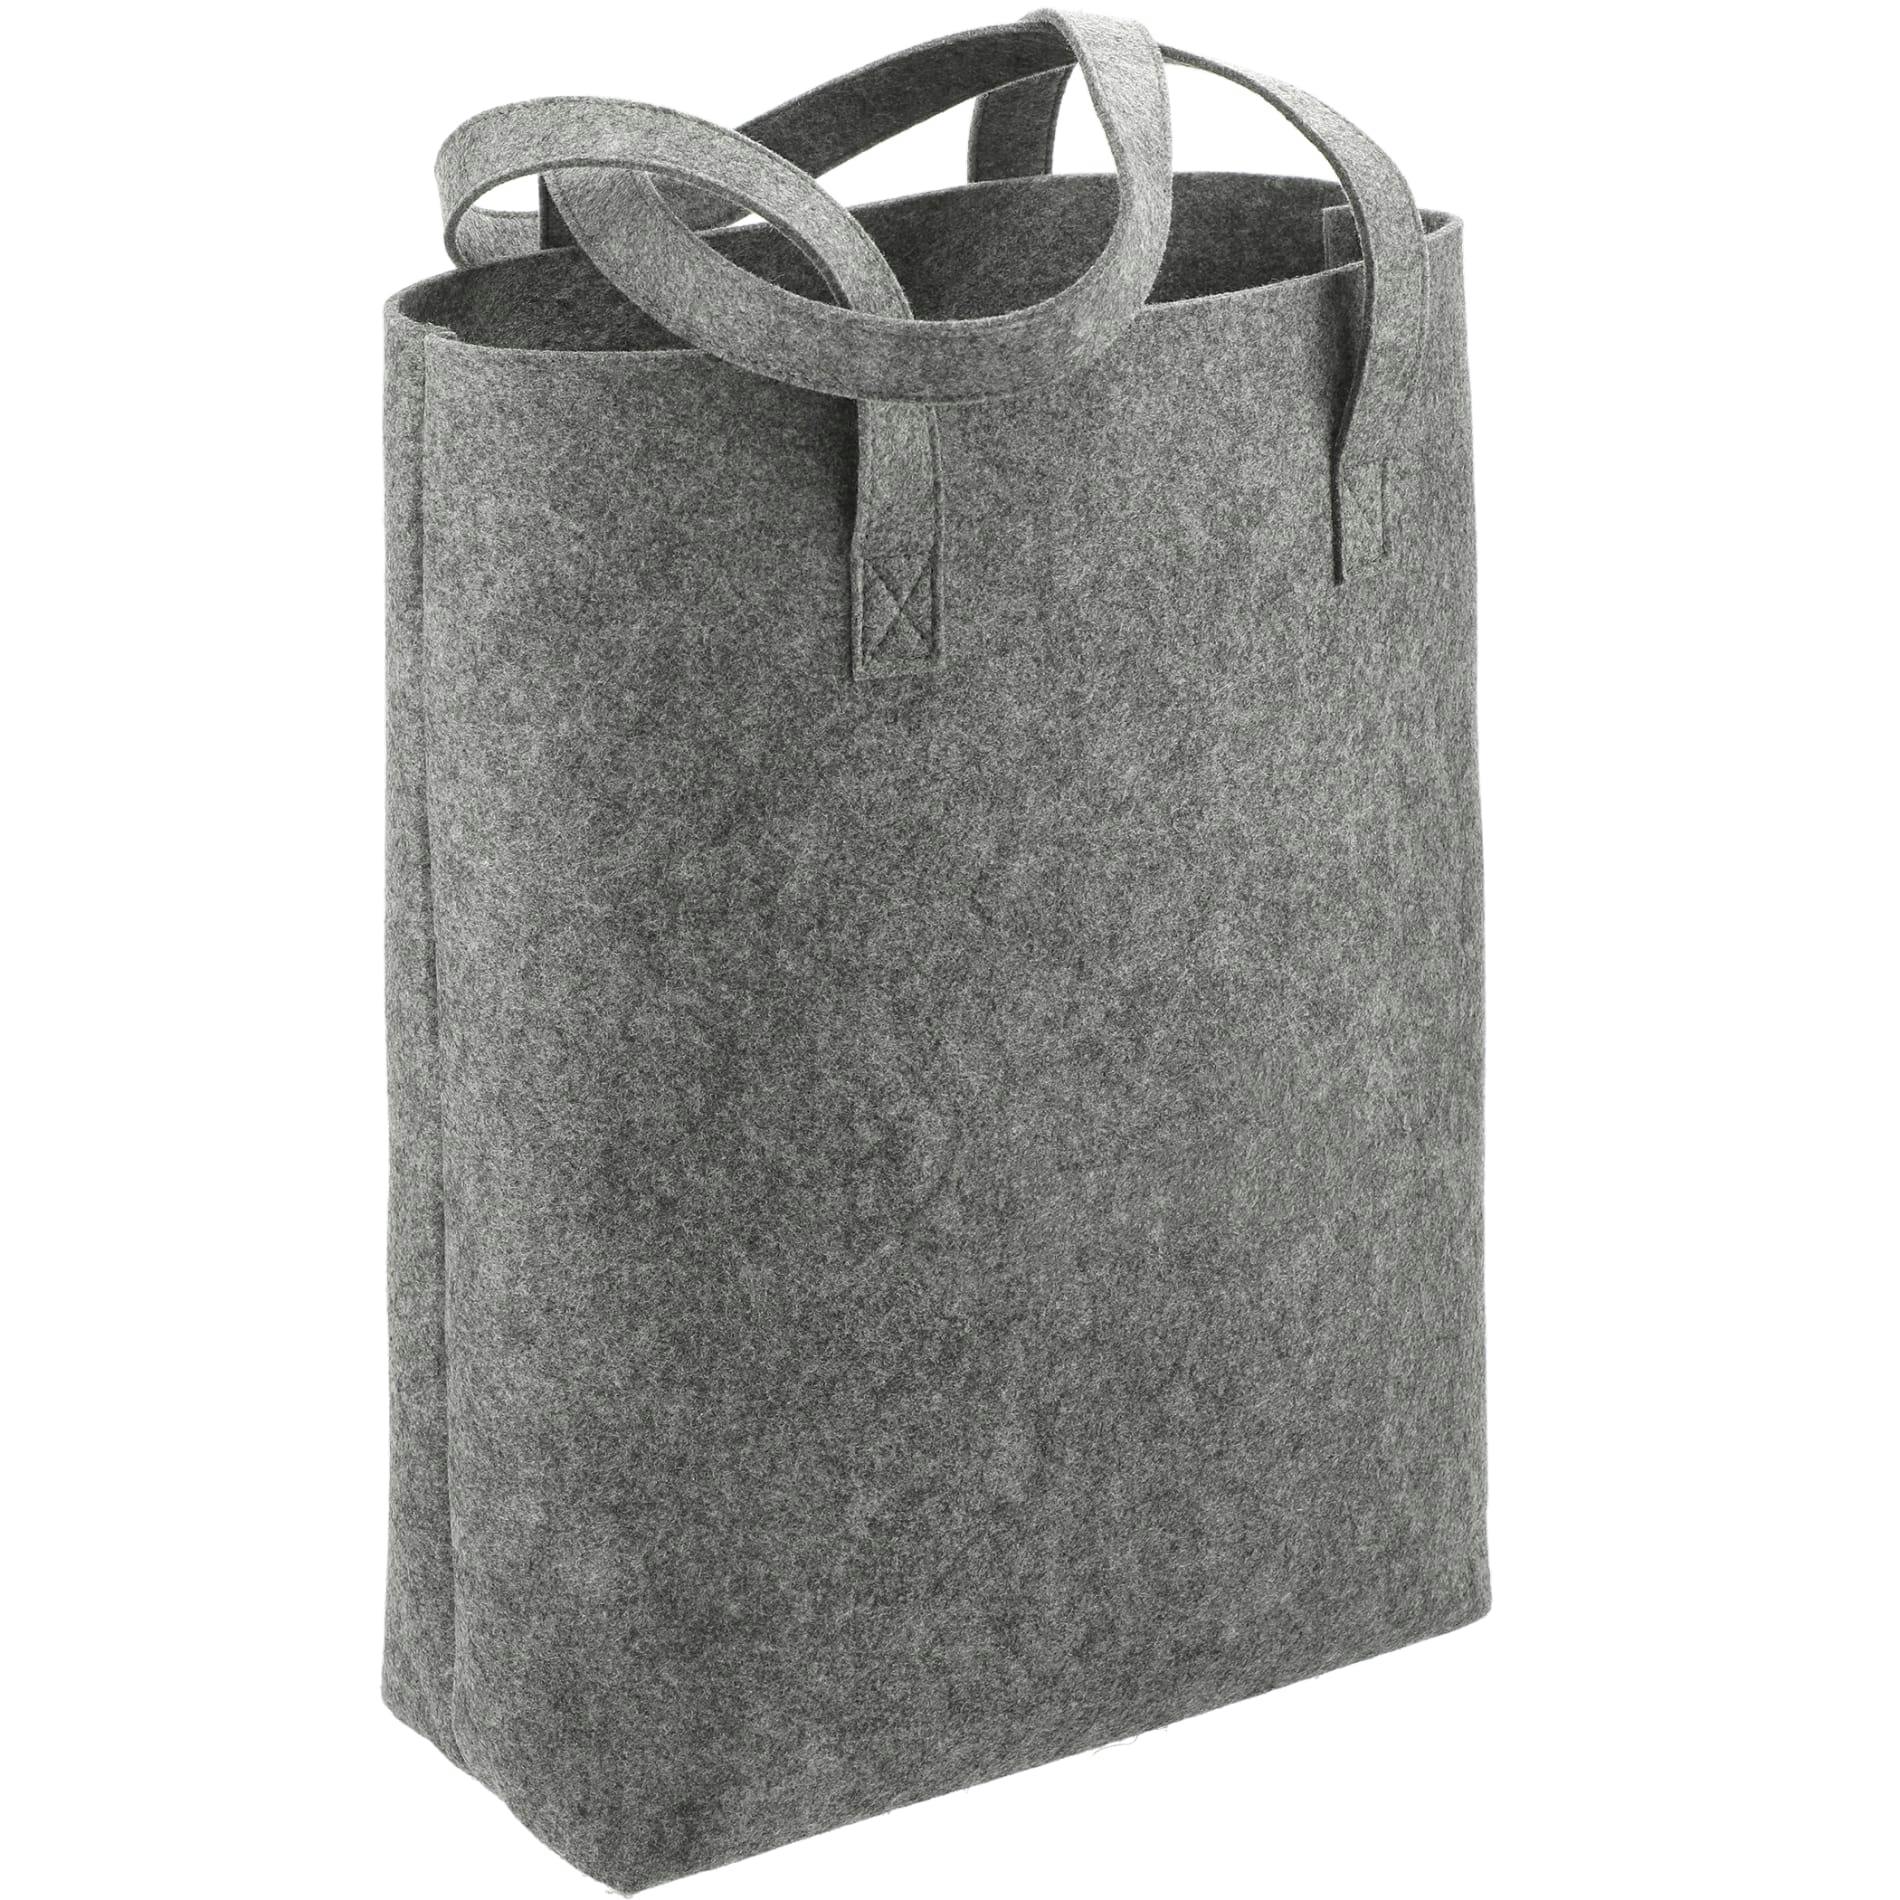 Recycled Felt Shopper Tote - additional Image 3